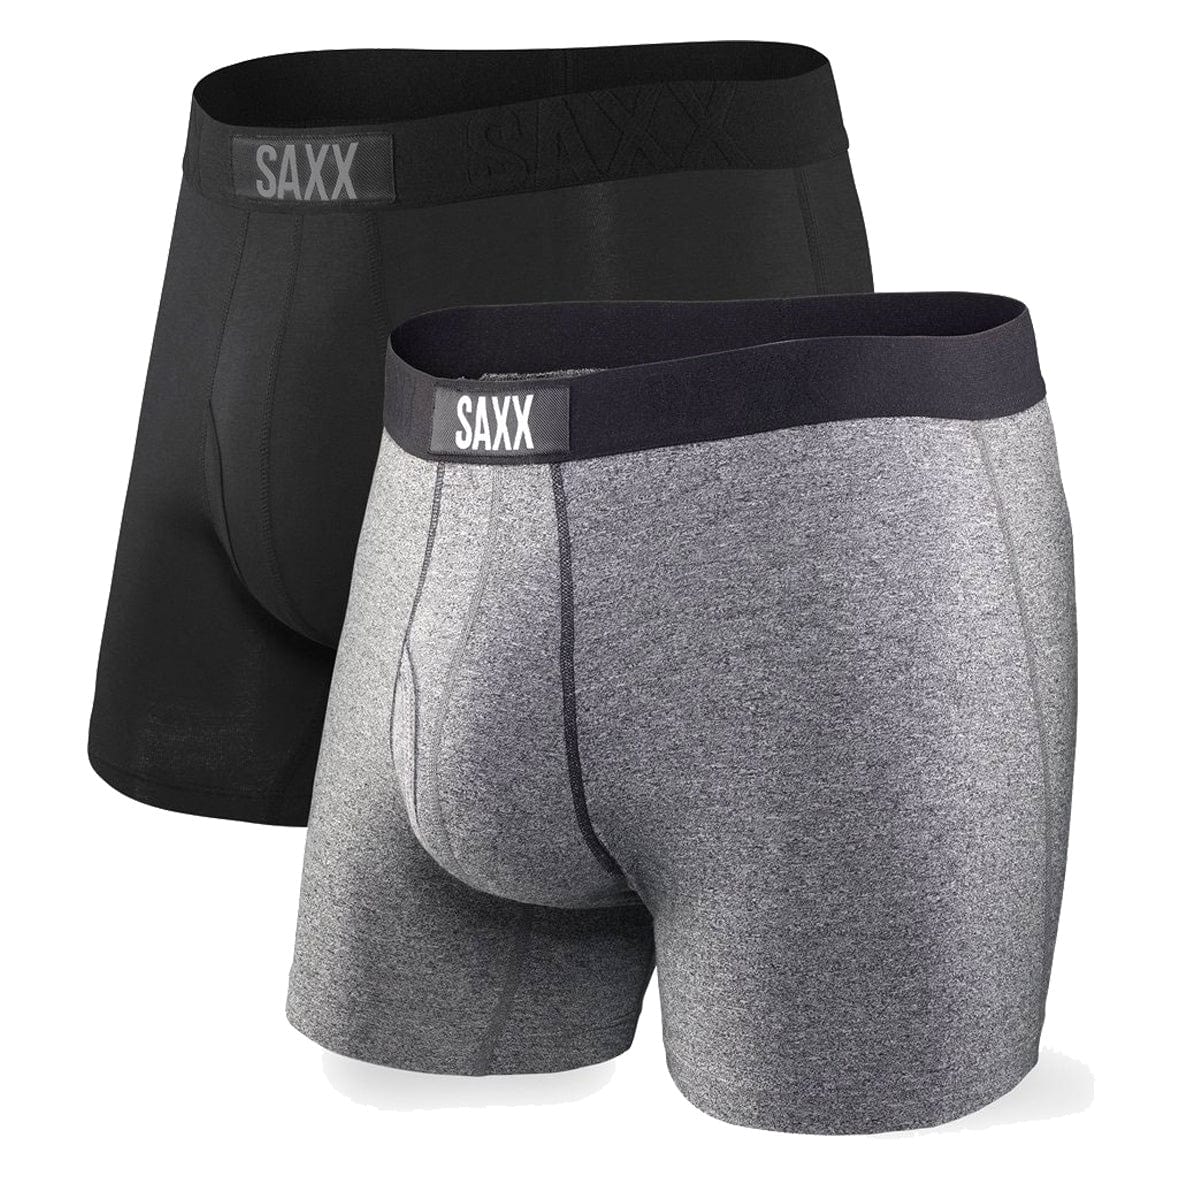 Saxx Ultra Boxers - Black / Grey (2 Pack) - The Hockey Shop Source For Sports